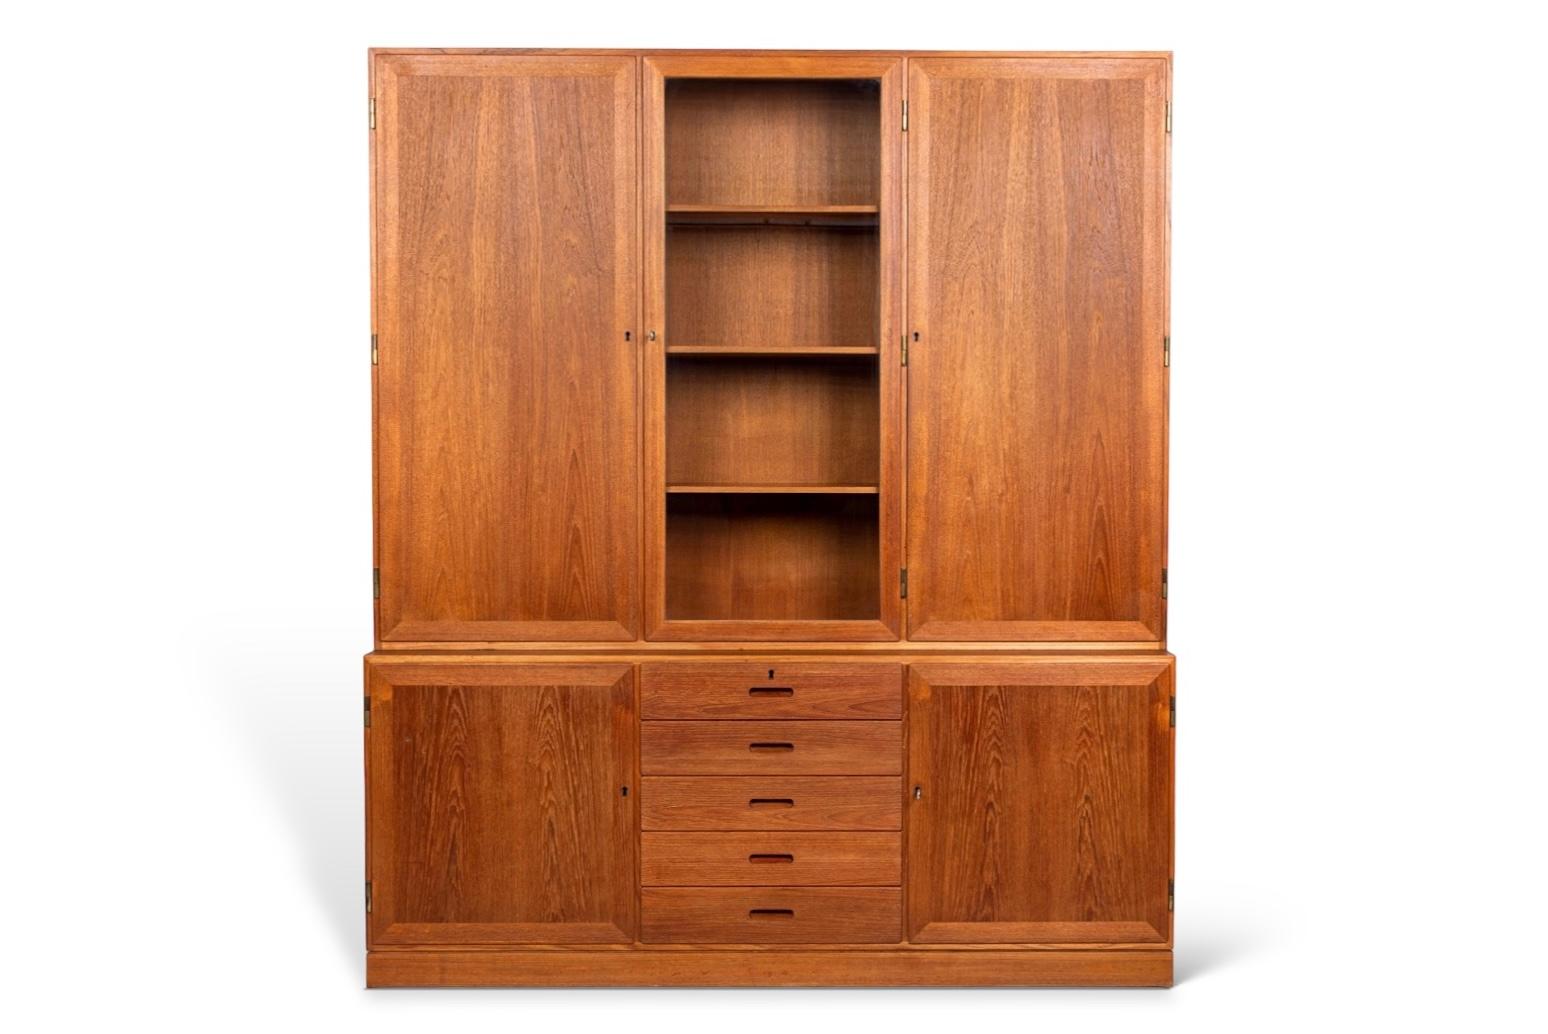 This exceptional step-back teak wood china cabinet or 